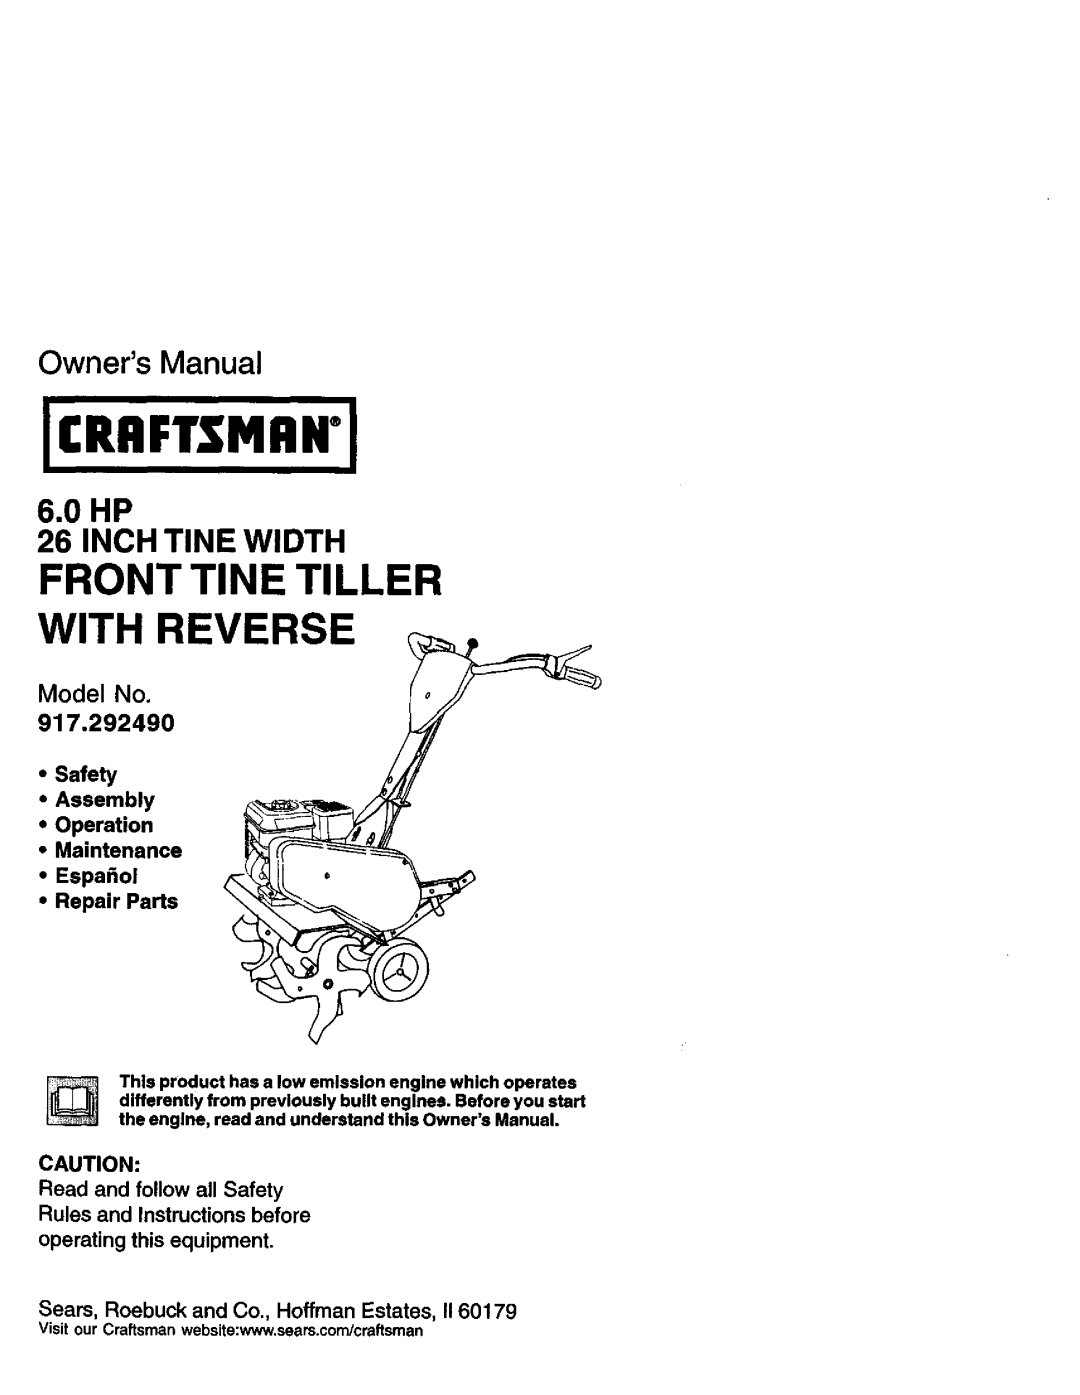 Craftsman 917.29249 owner manual 6.0 HP 26 INCH TINE WIDTH, Safety Assembly Operation, Maintenance Espa ol Repair Parts 